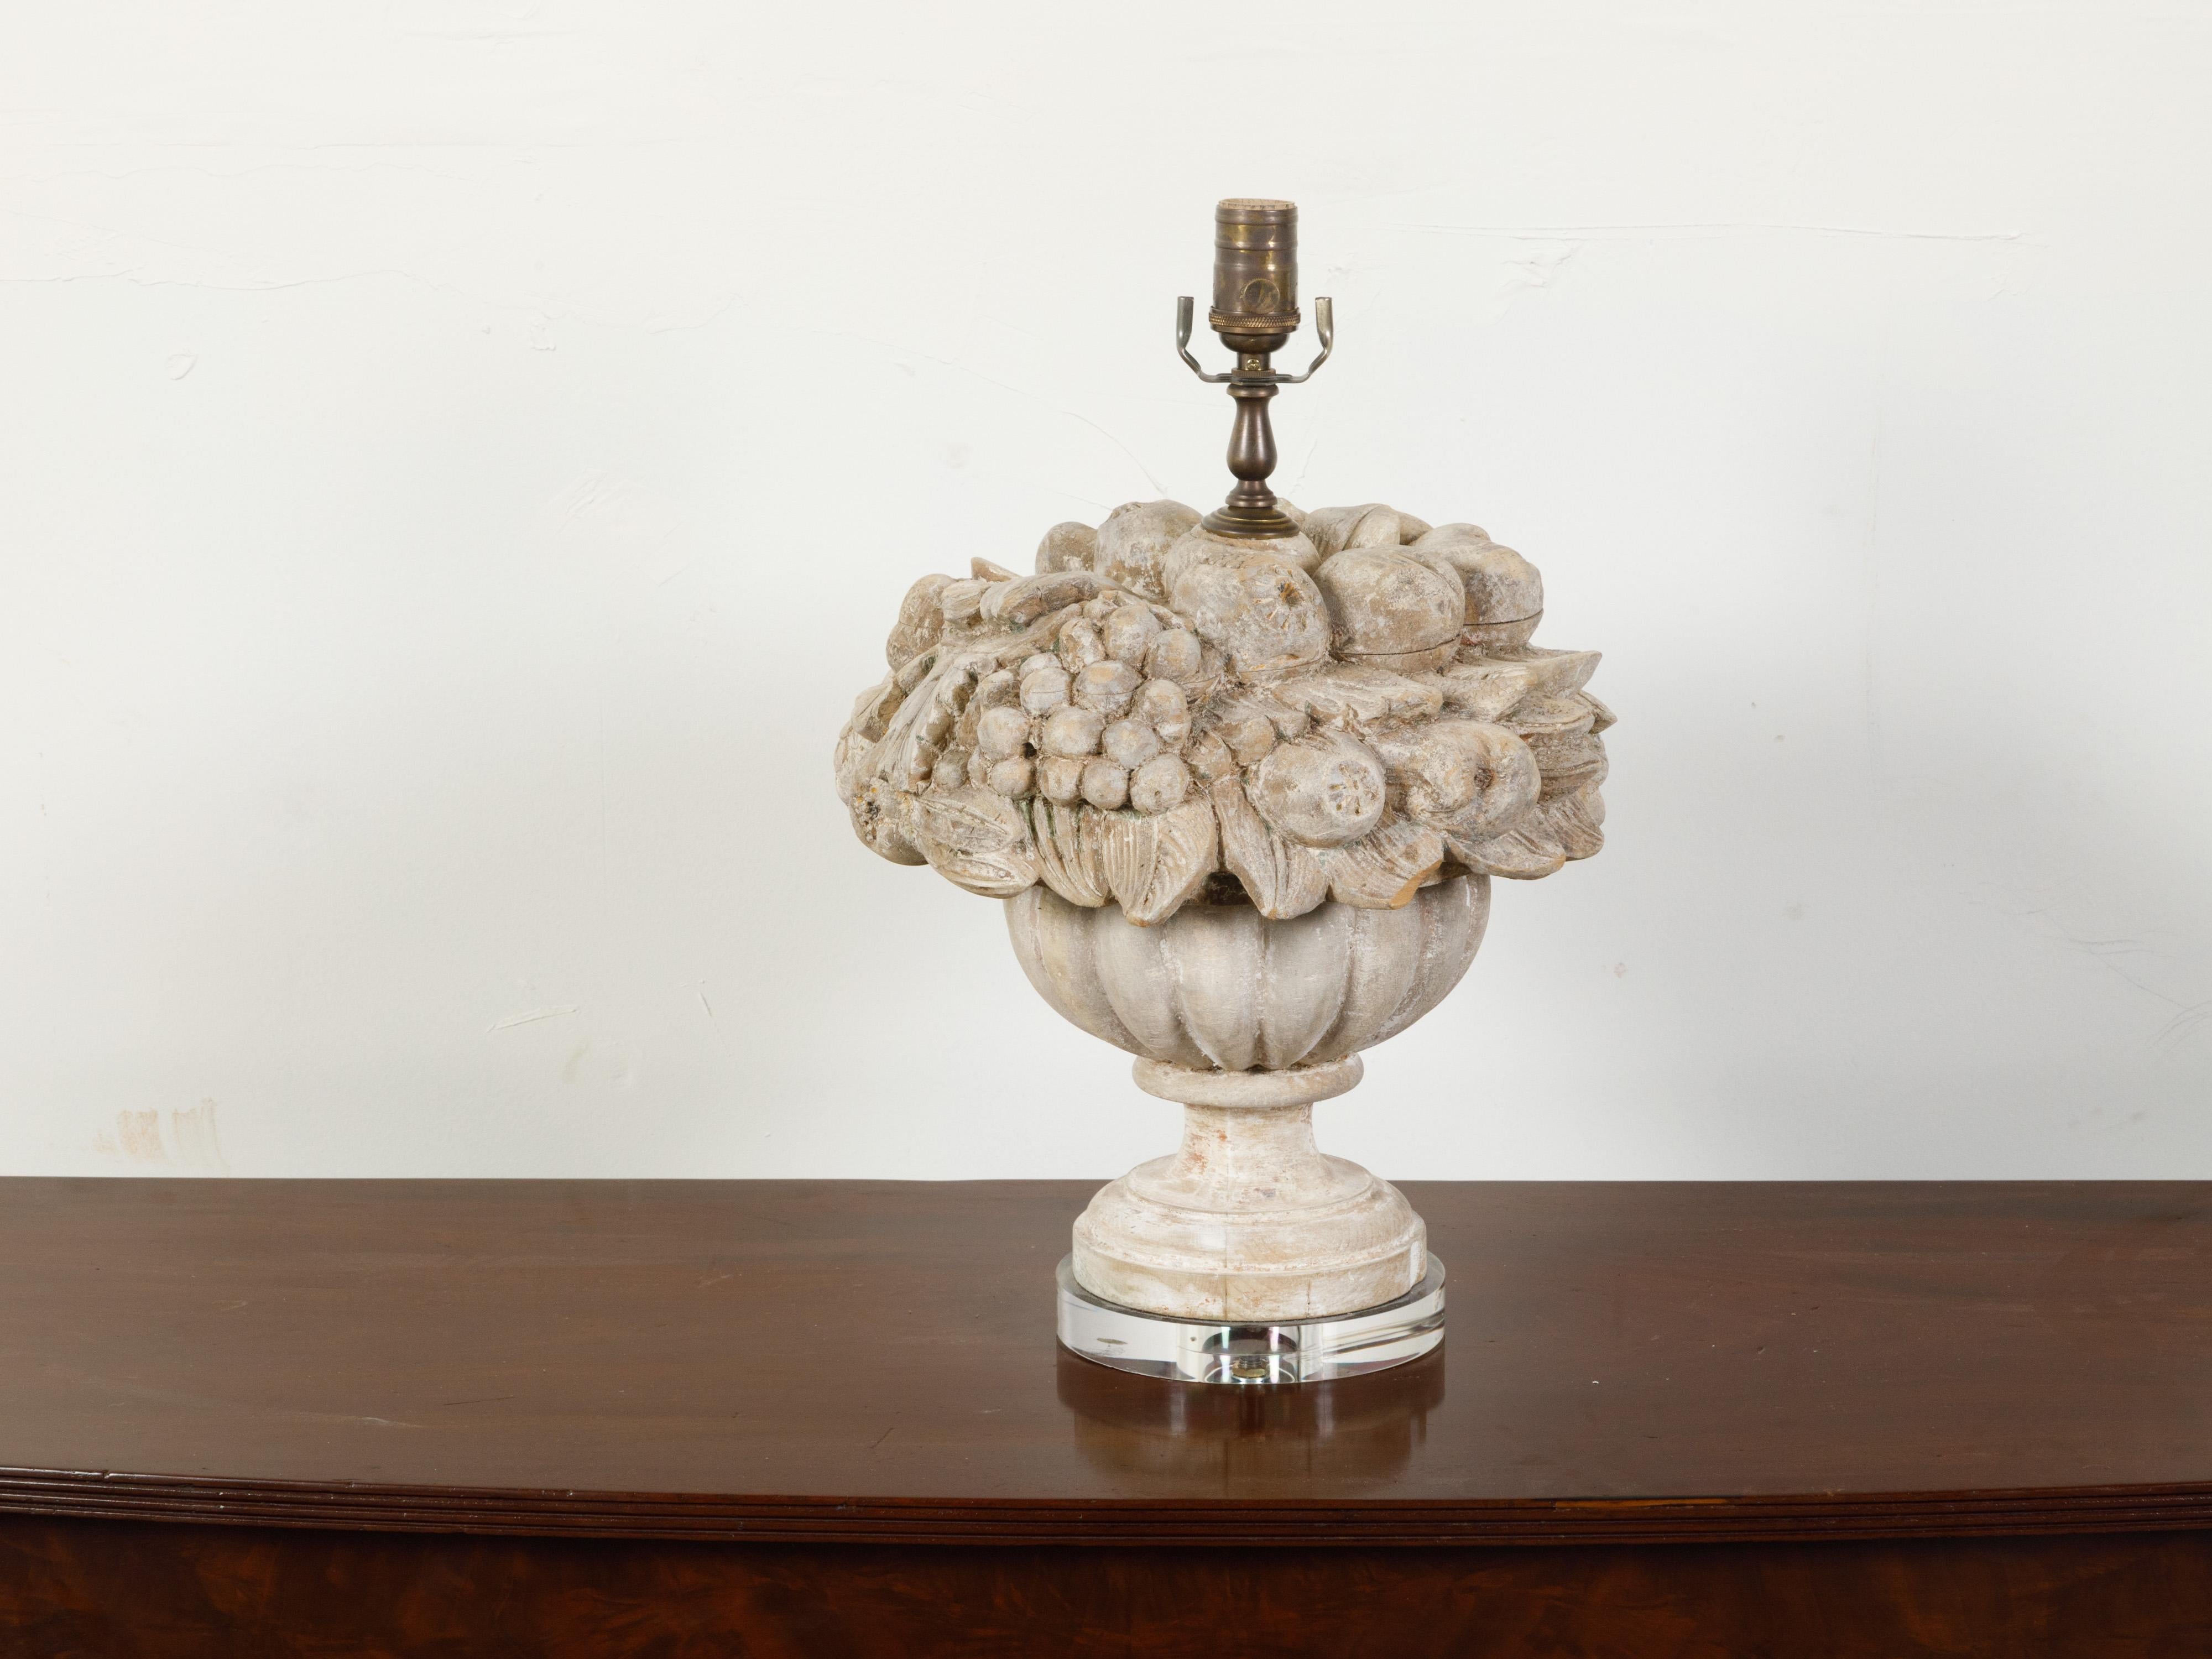 An English carved wooden fragment table lamp from the early 20th century, depicting a vessel overflowing with fruits and mounted on lucite base. Created in England during the first decade of the 20th century, this sculpture charms us with its